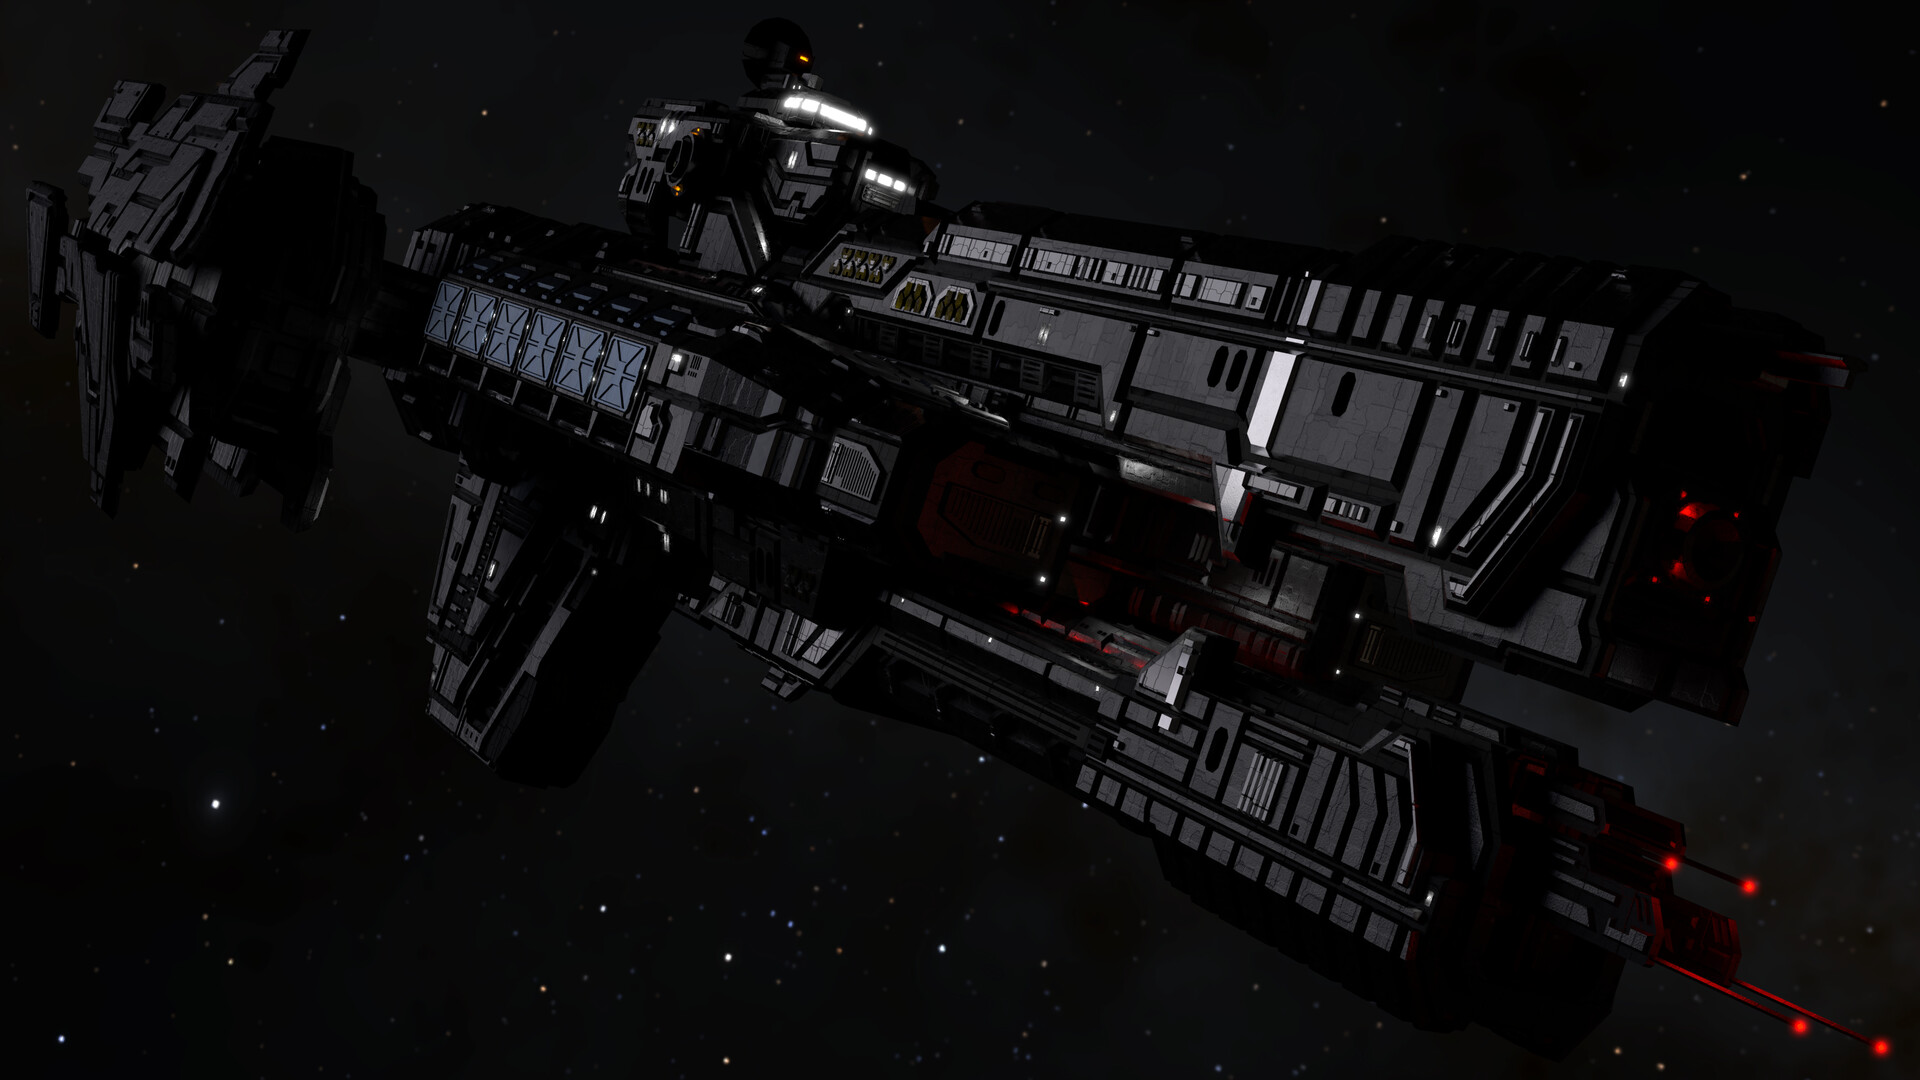 Rhynhelt - Halo | UNSC Paris-Class Frigate [COMPLETED]